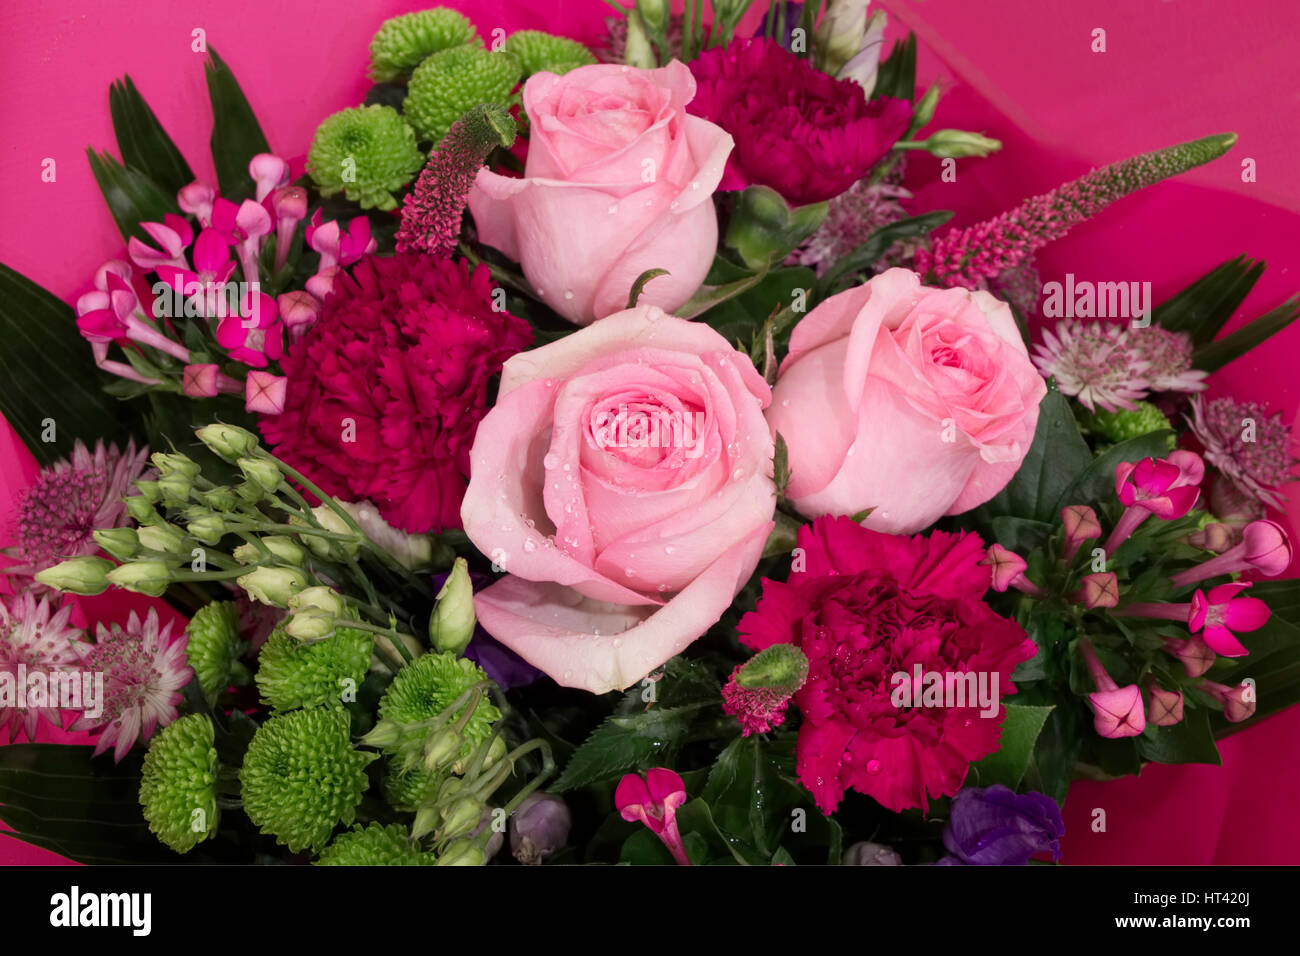 Flowers bouquet pink red Stock Photo